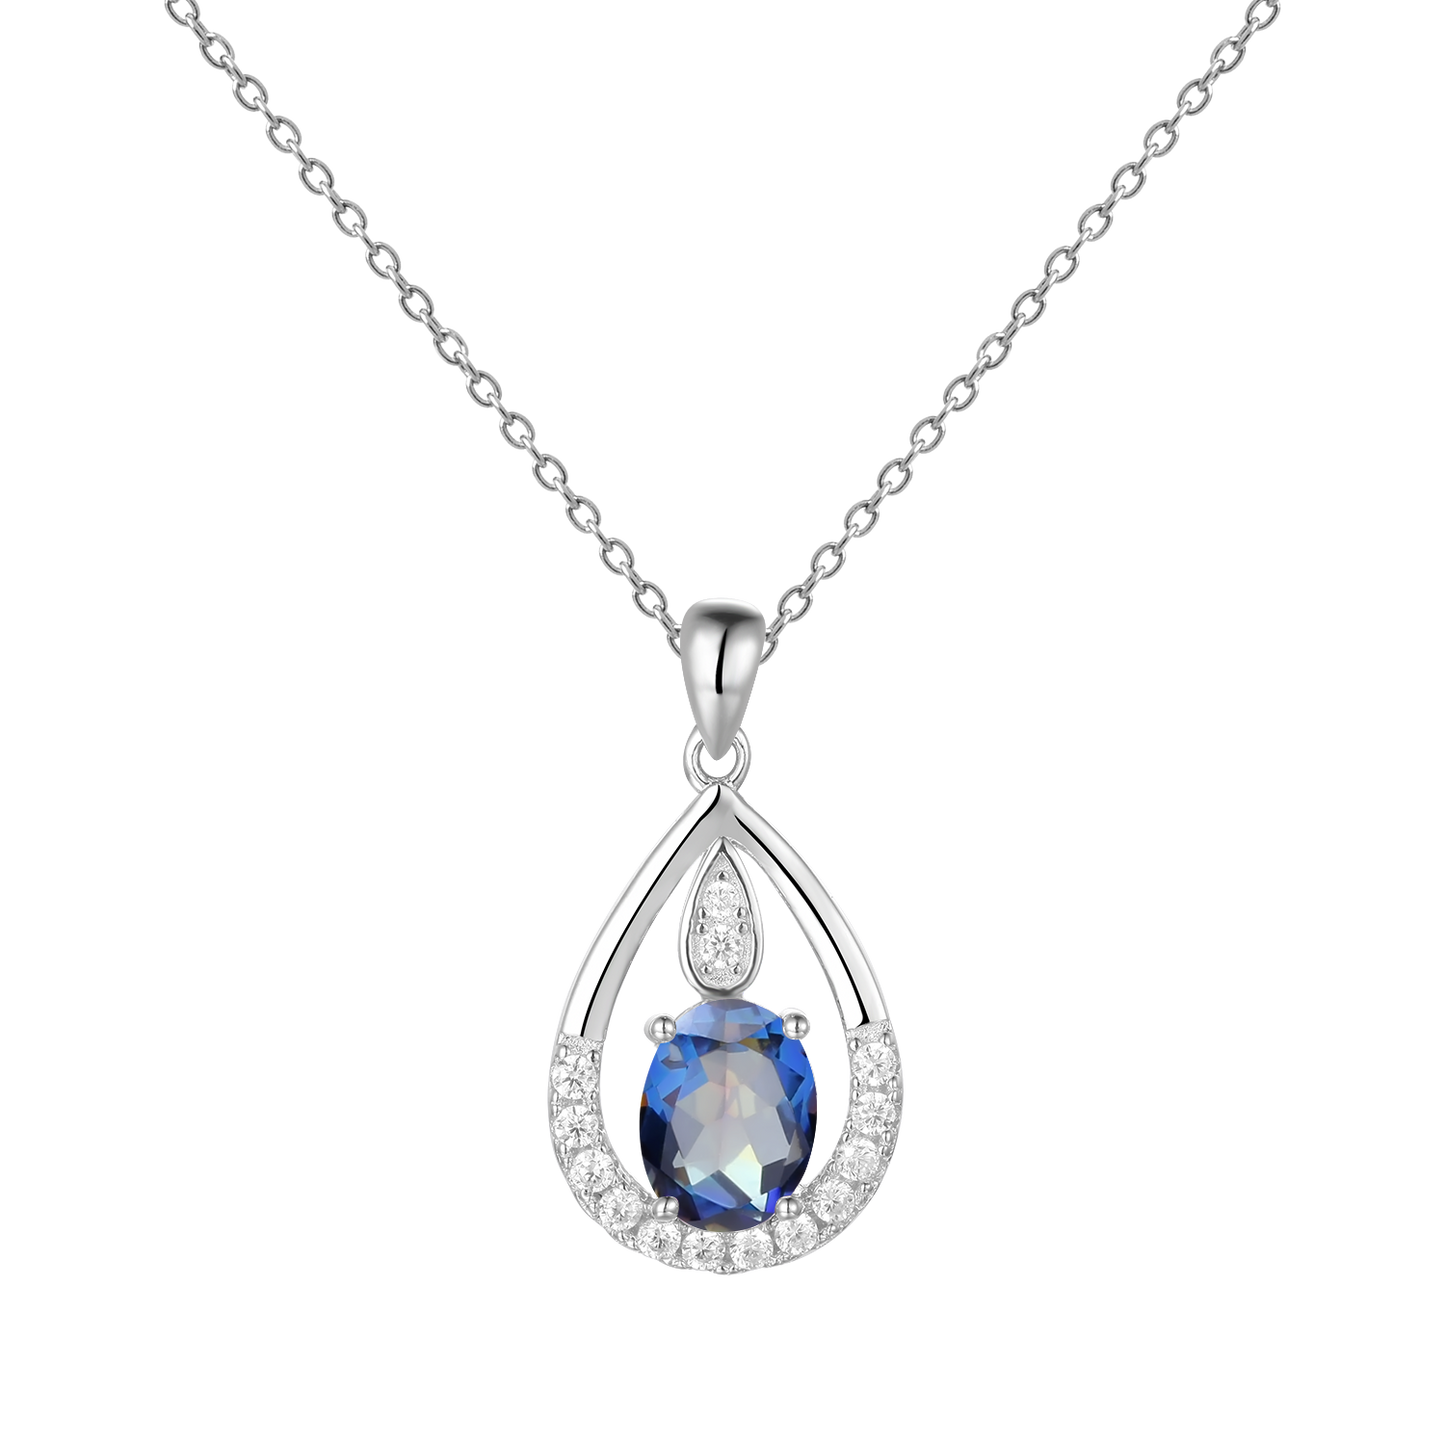 Gem&#39;s Ballet December Birthstone Topaz Necklace 6x8mm Oval Pink Topaz Pendant Necklace in 925 Sterling Silver with 18&quot; Chain Blueish